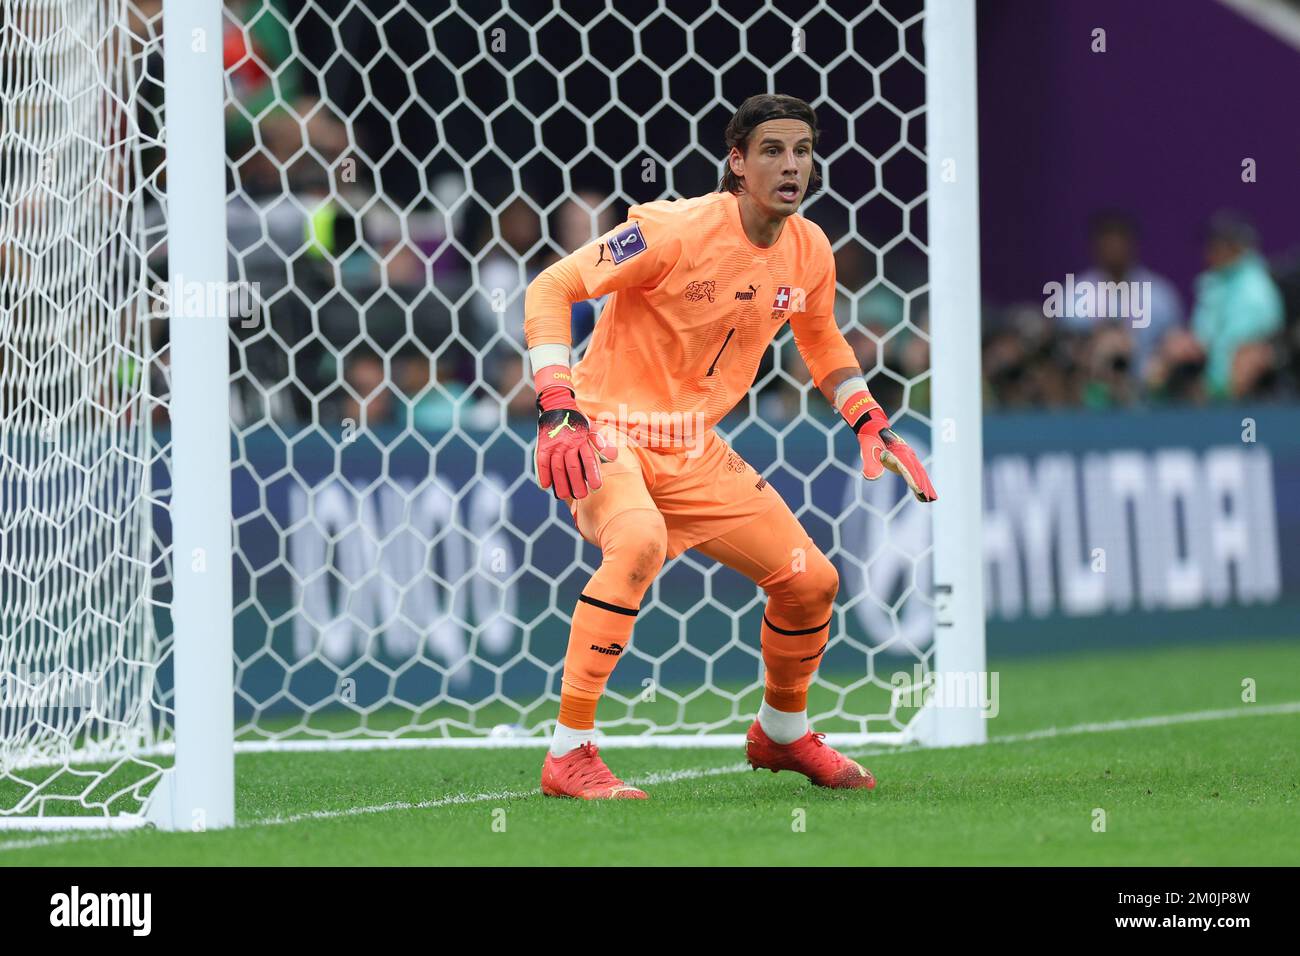 Doha, Qatar. 06th Dec, 2022. Yann Sommer of Switzerland during a match against Portugal valid for the round of 16 of the FIFA World Cup at Lusail Stadium, in Doha, Qatar. December 06, 2022 Credit: Brazil Photo Press/Alamy Live News Stock Photo